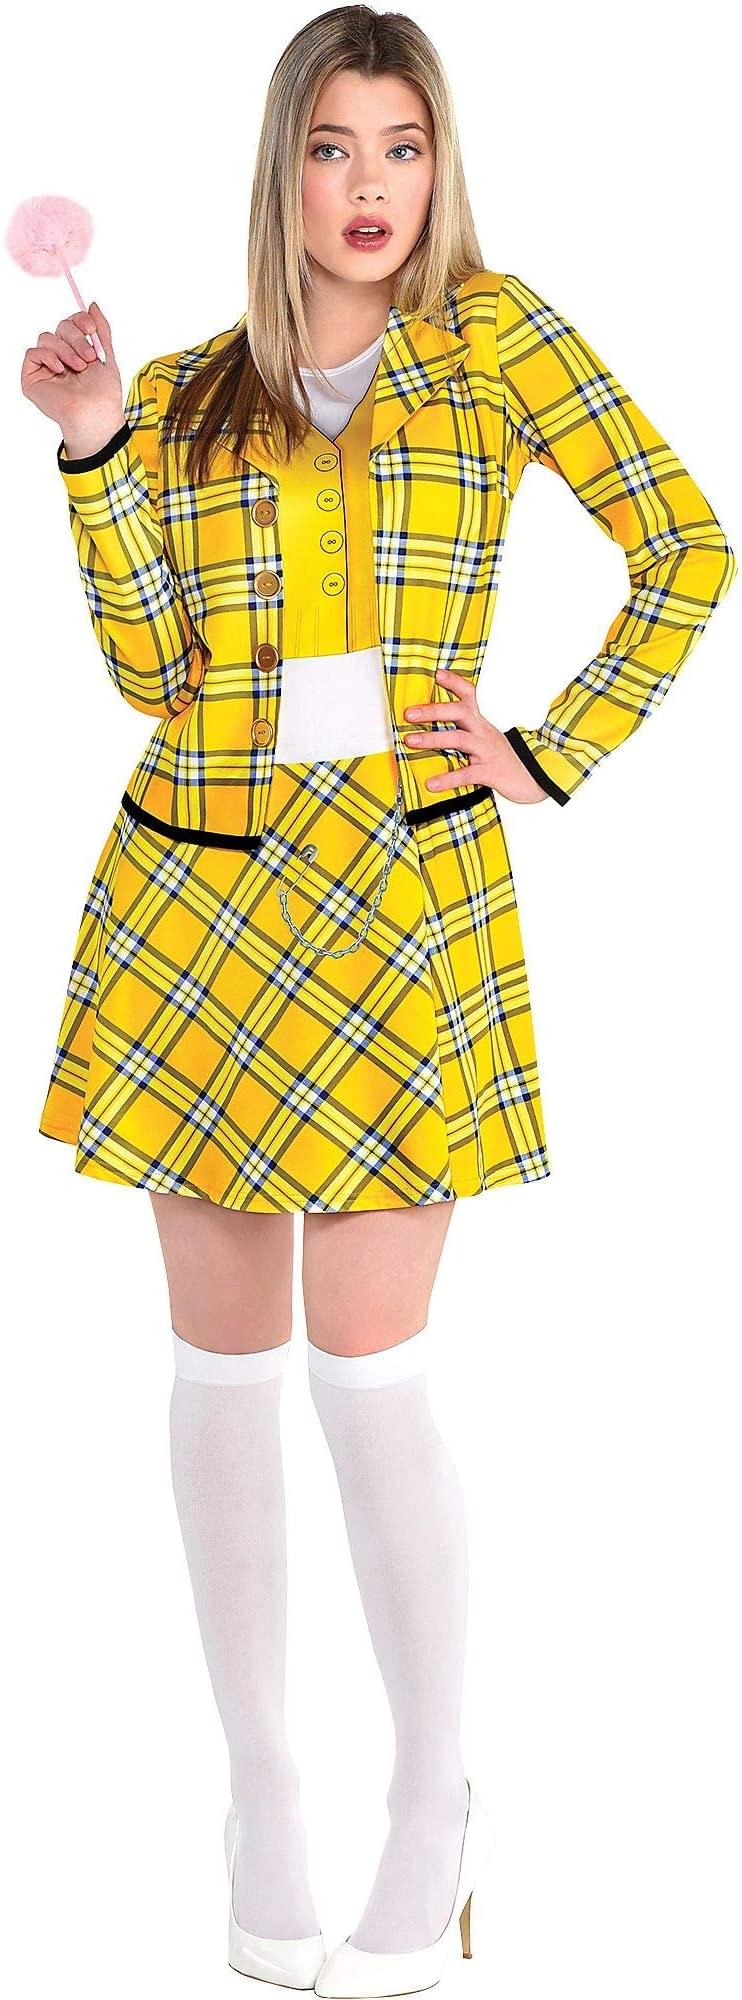 Clueless Cher Adult Costume Kit | One Size Fits Most